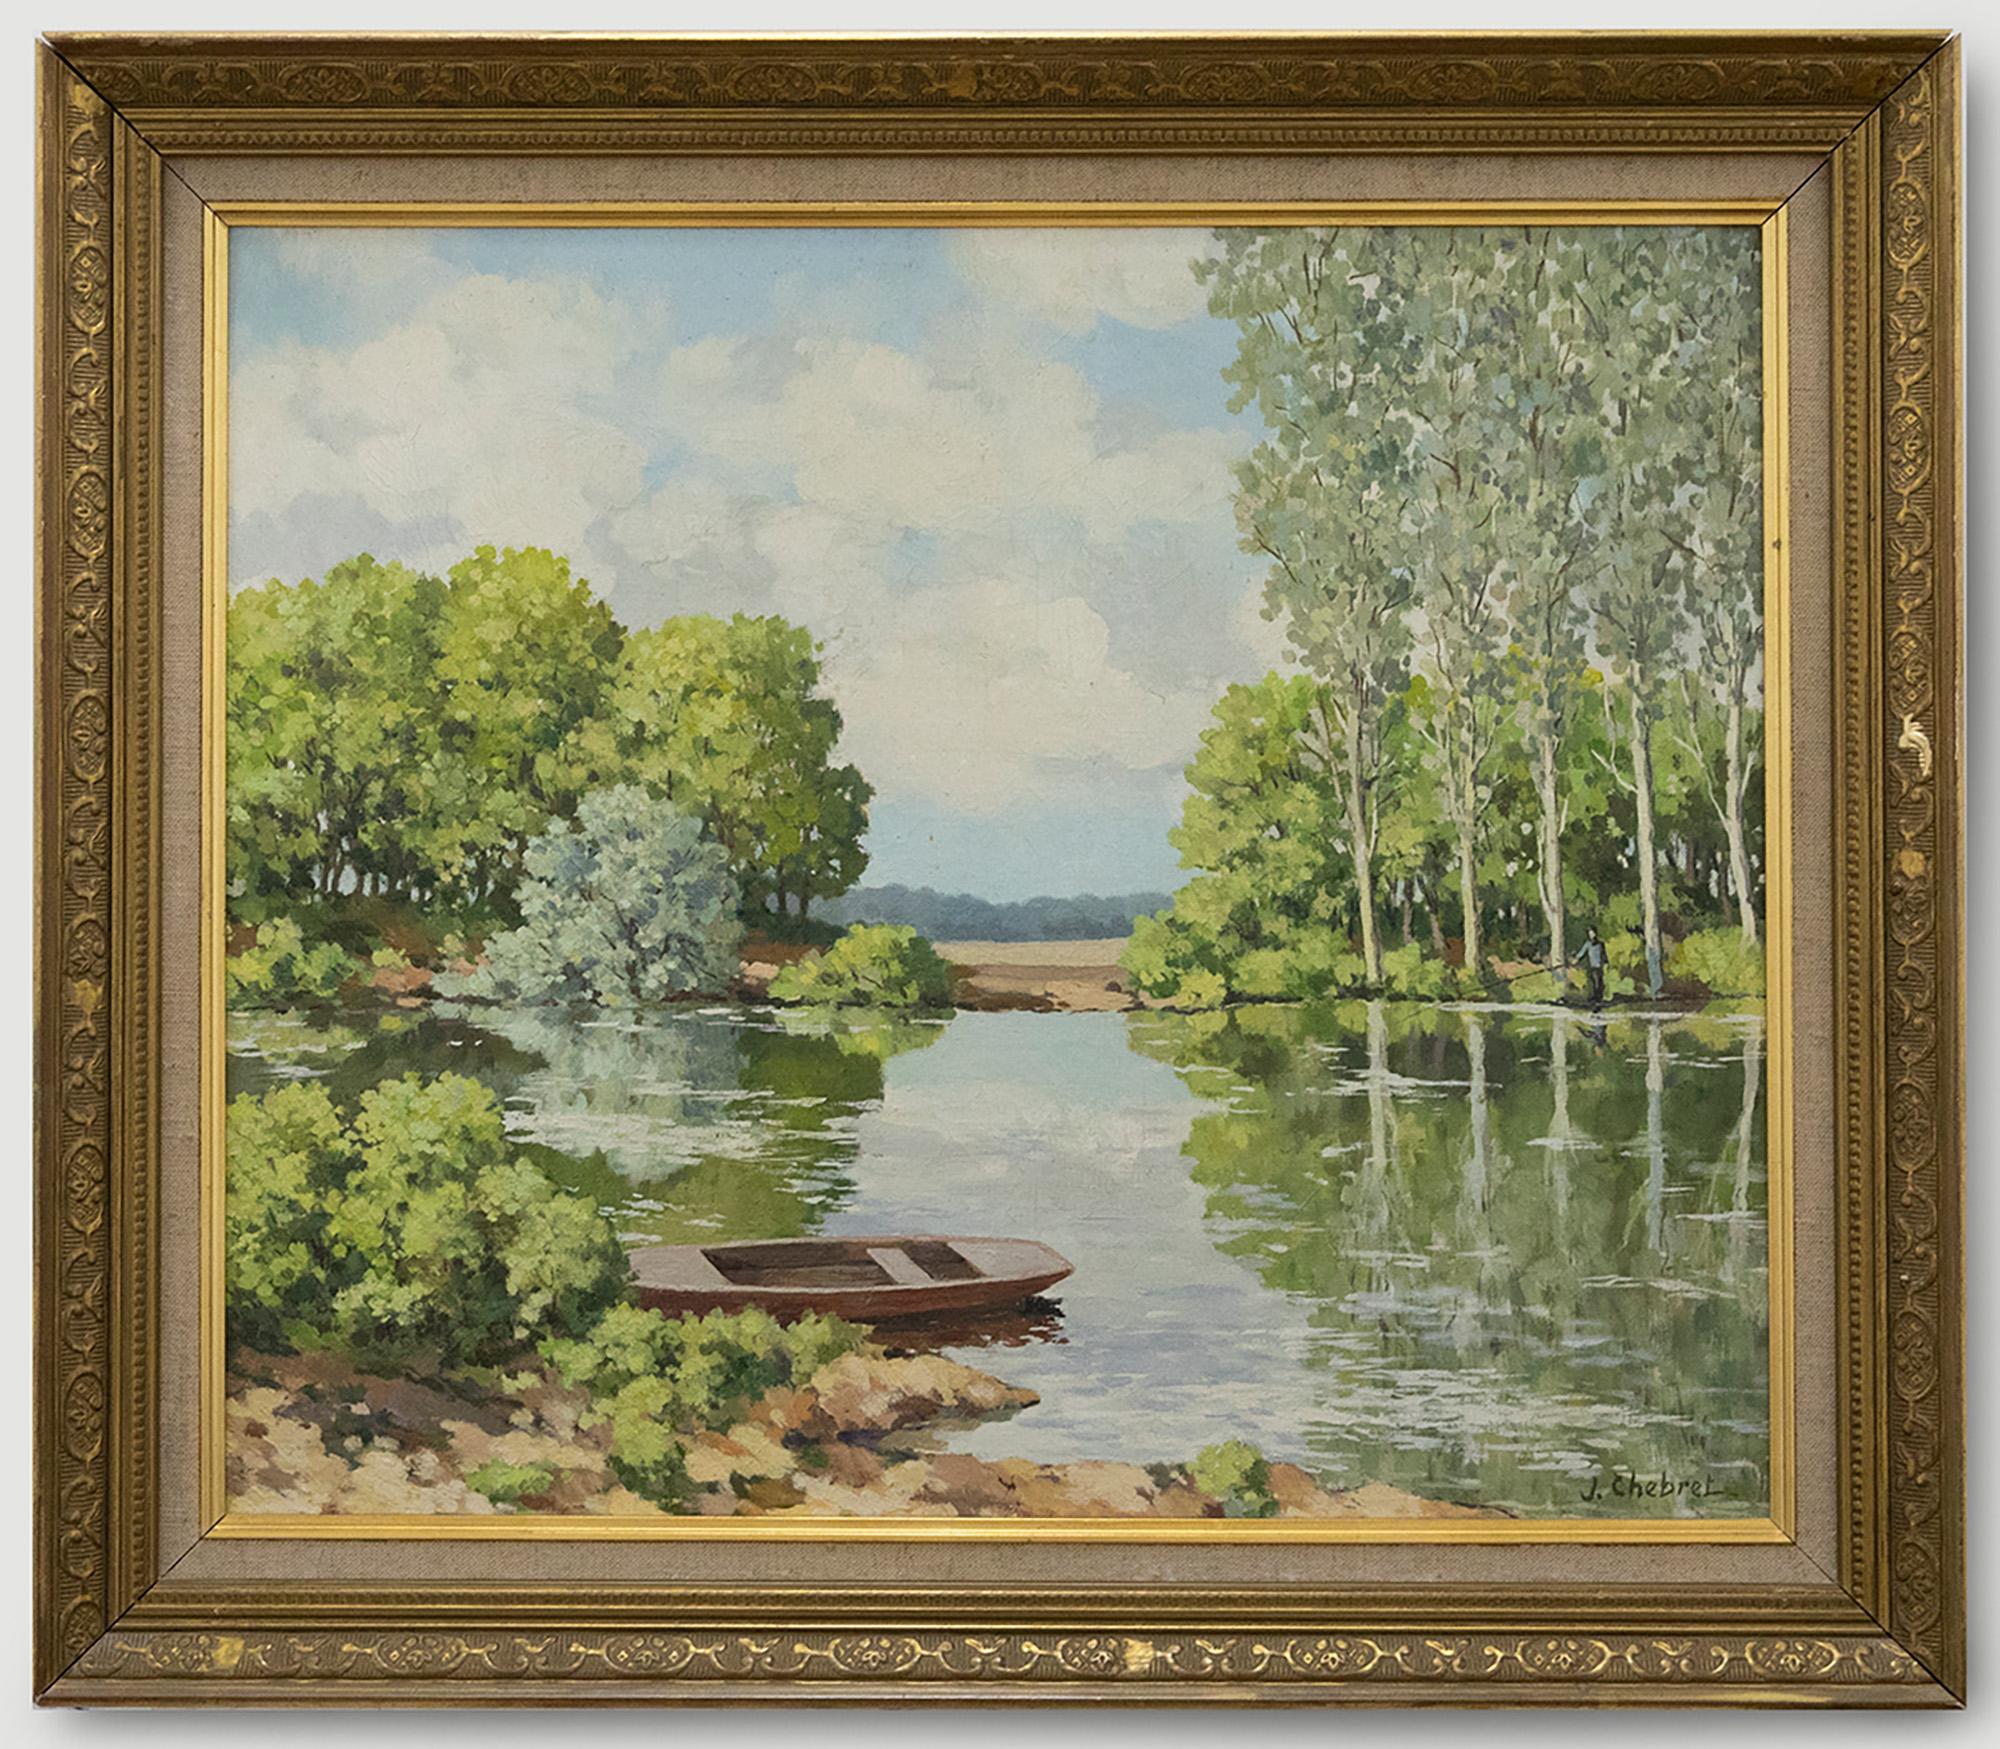 A charming depiction tranquil lake in high summer. Signed to the lower right. Presented in a gilt frame with decorative c-scrolling to the cove. On canvas.